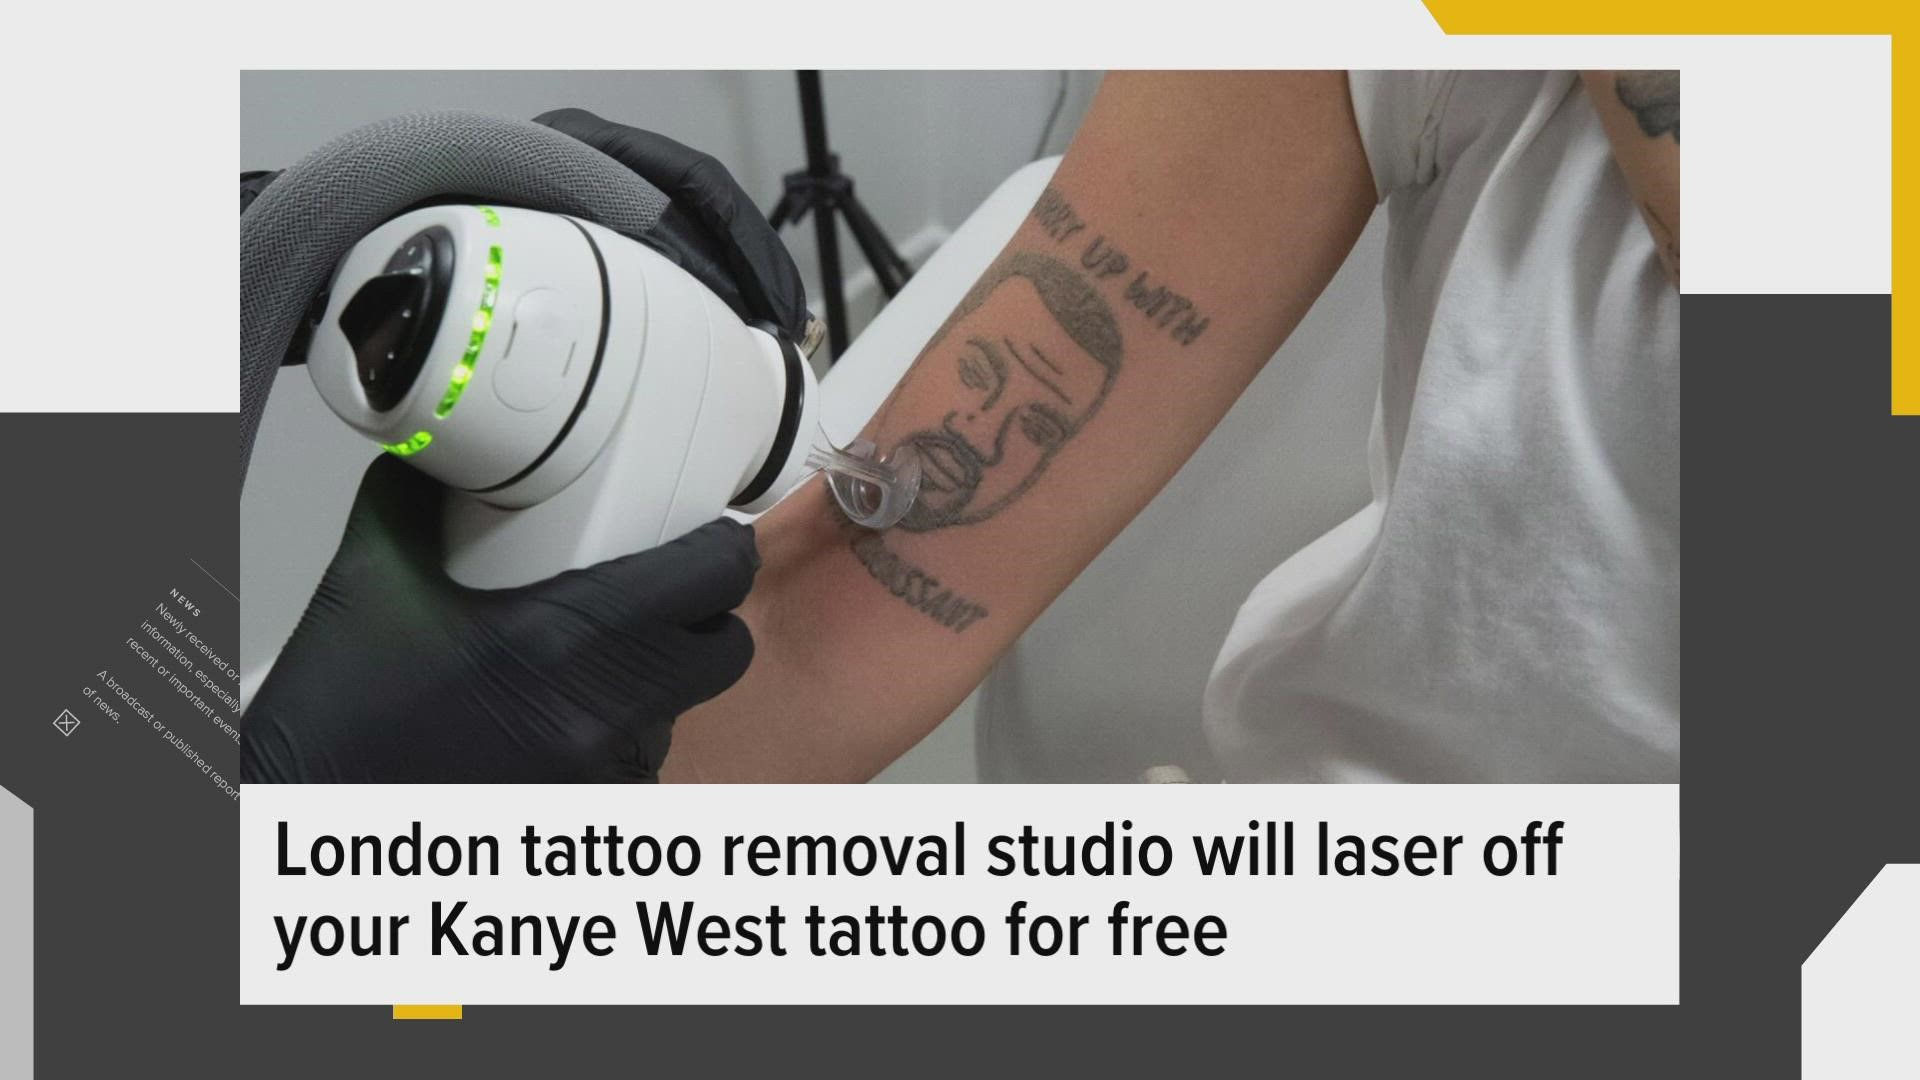 Miley Cyrus Seeks Out Laser Tattoo Removal | National Laser Institute